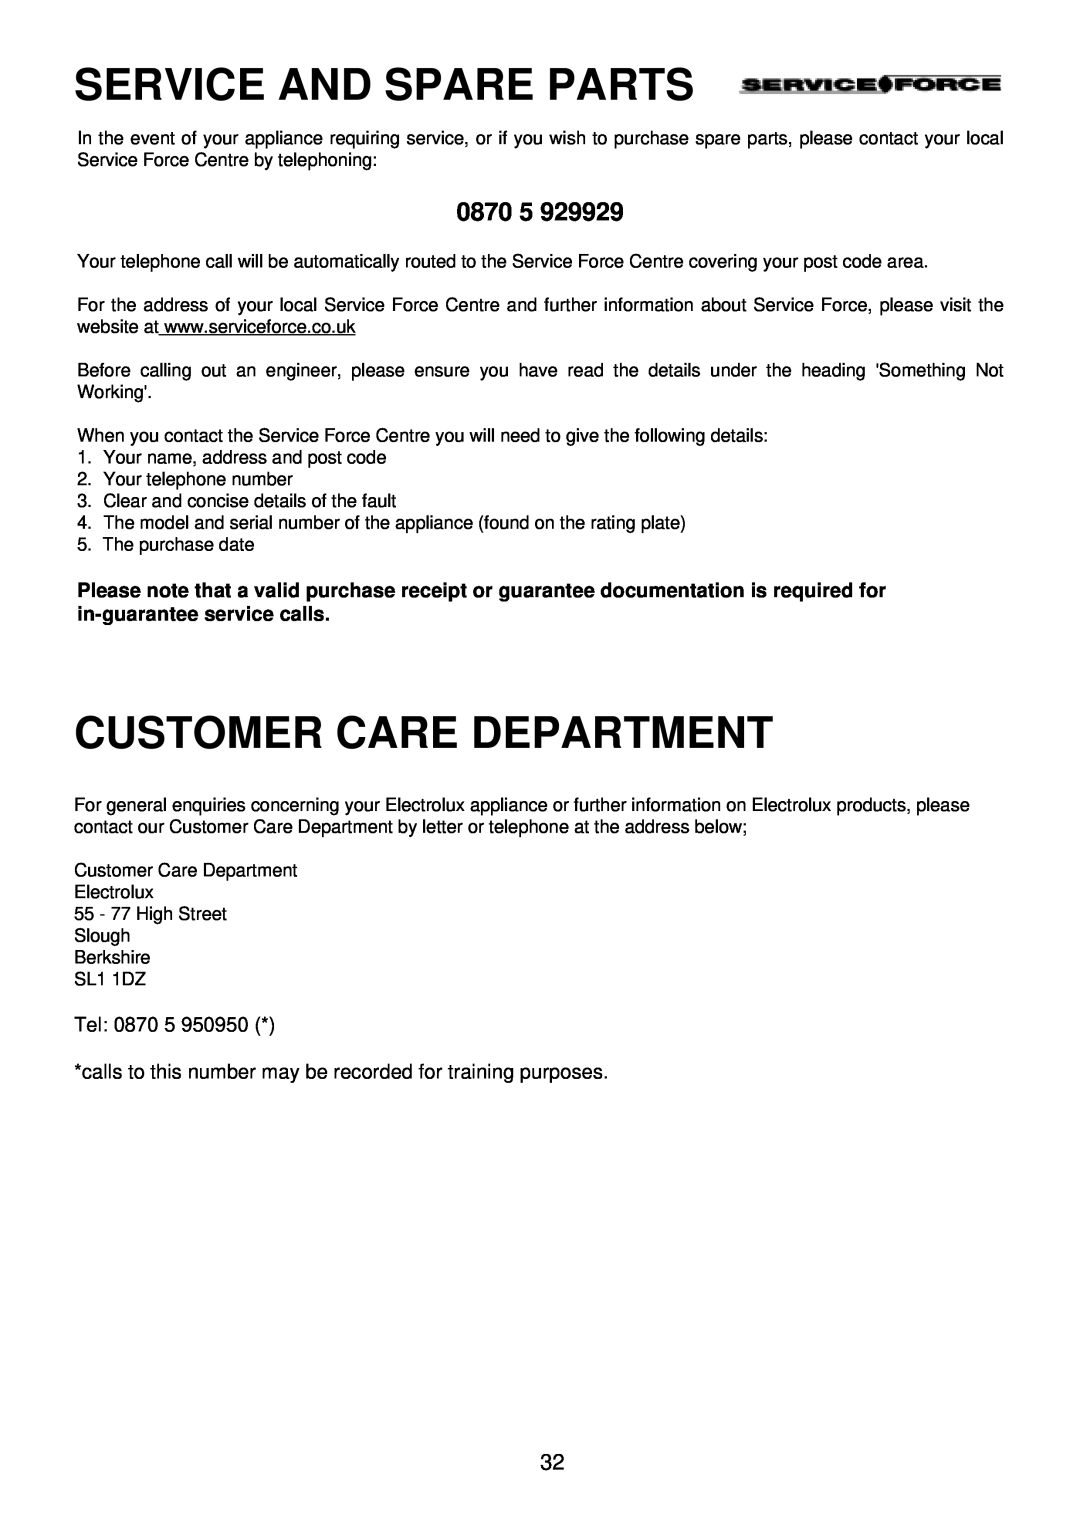 Electrolux EDB 872 manual 0870 5, Service And Spare Parts, Customer Care Department 